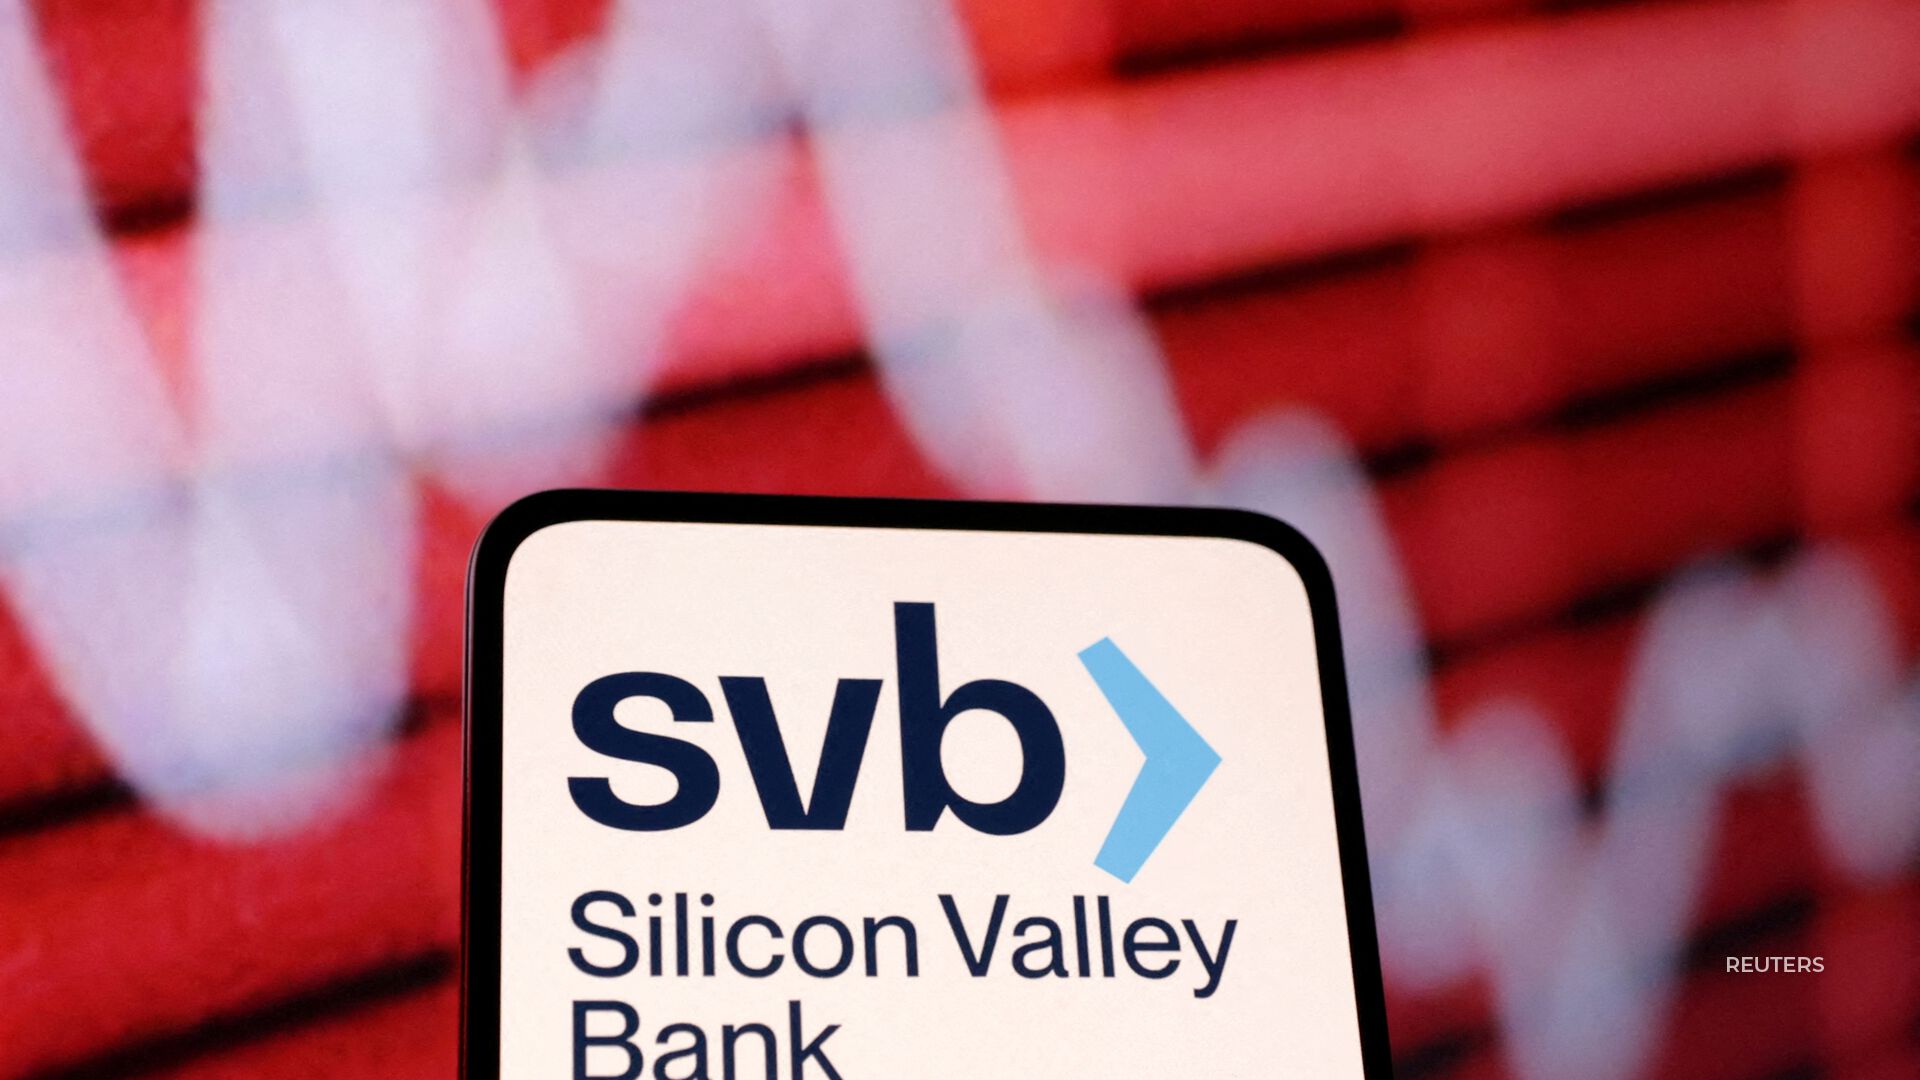 On Thursday, Silicon Valley Bank lost 60% of its stock, wiping out over  billion in value from bank shares.